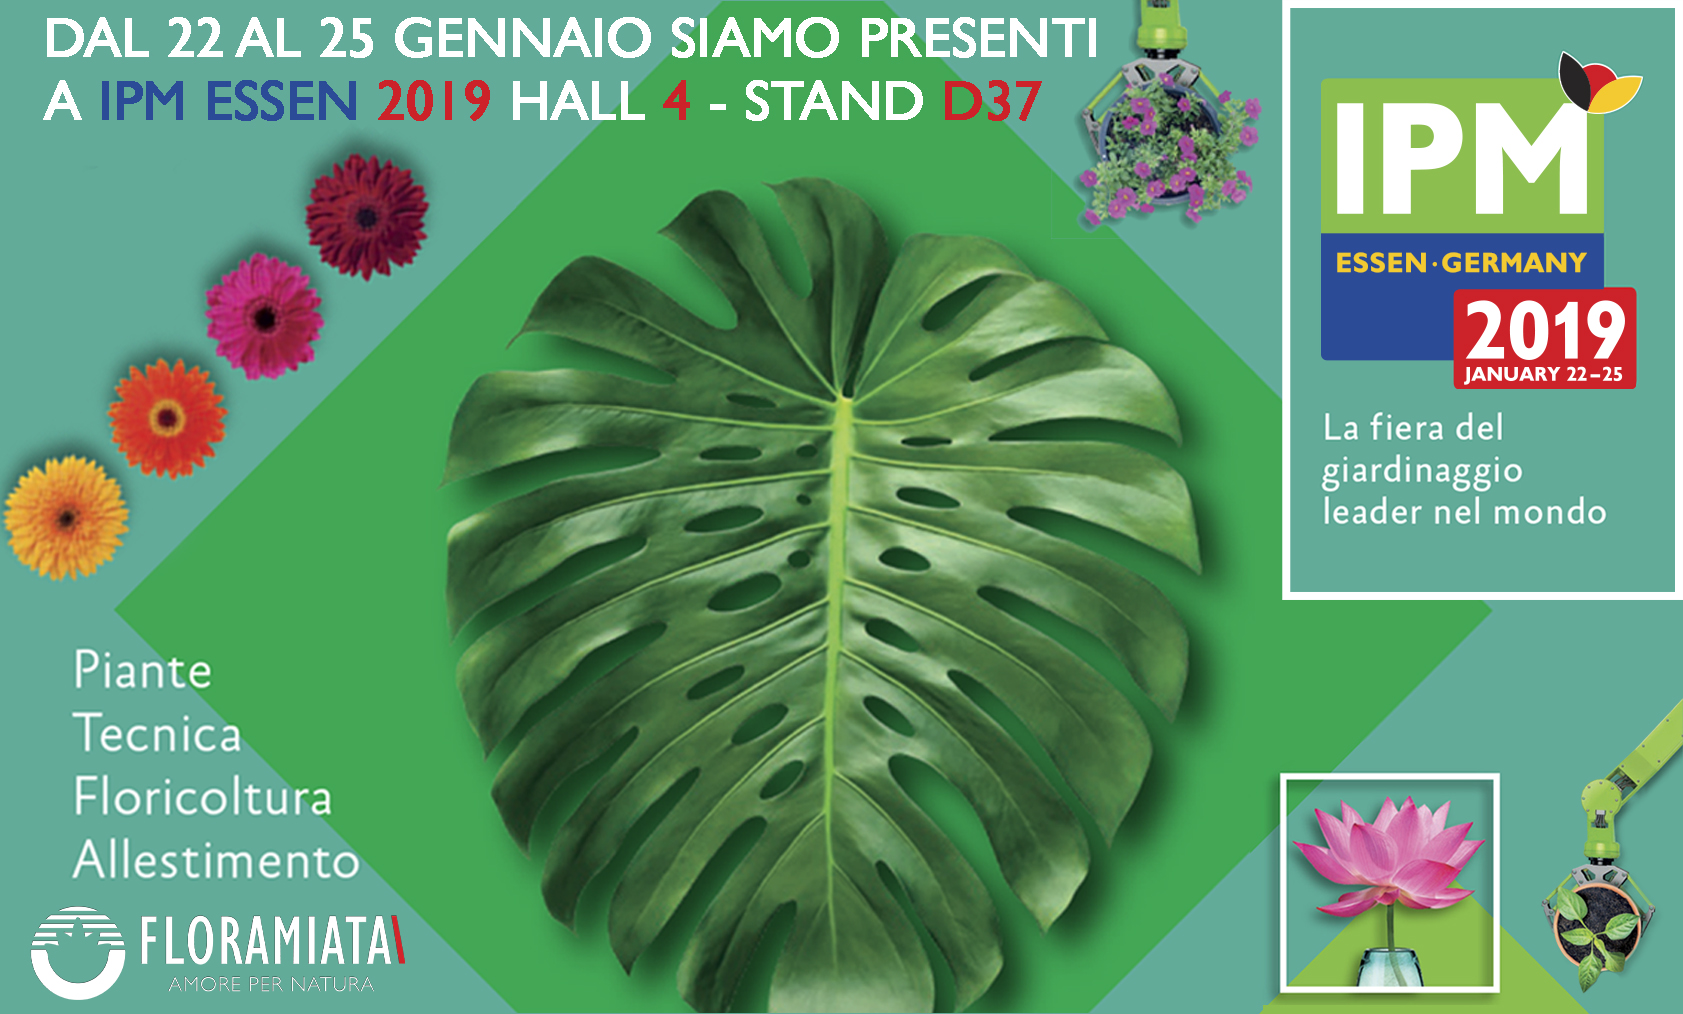 Floramiata and Giorgio Tesi Group will be present at the IPM in Essen from 22nd to 25th January